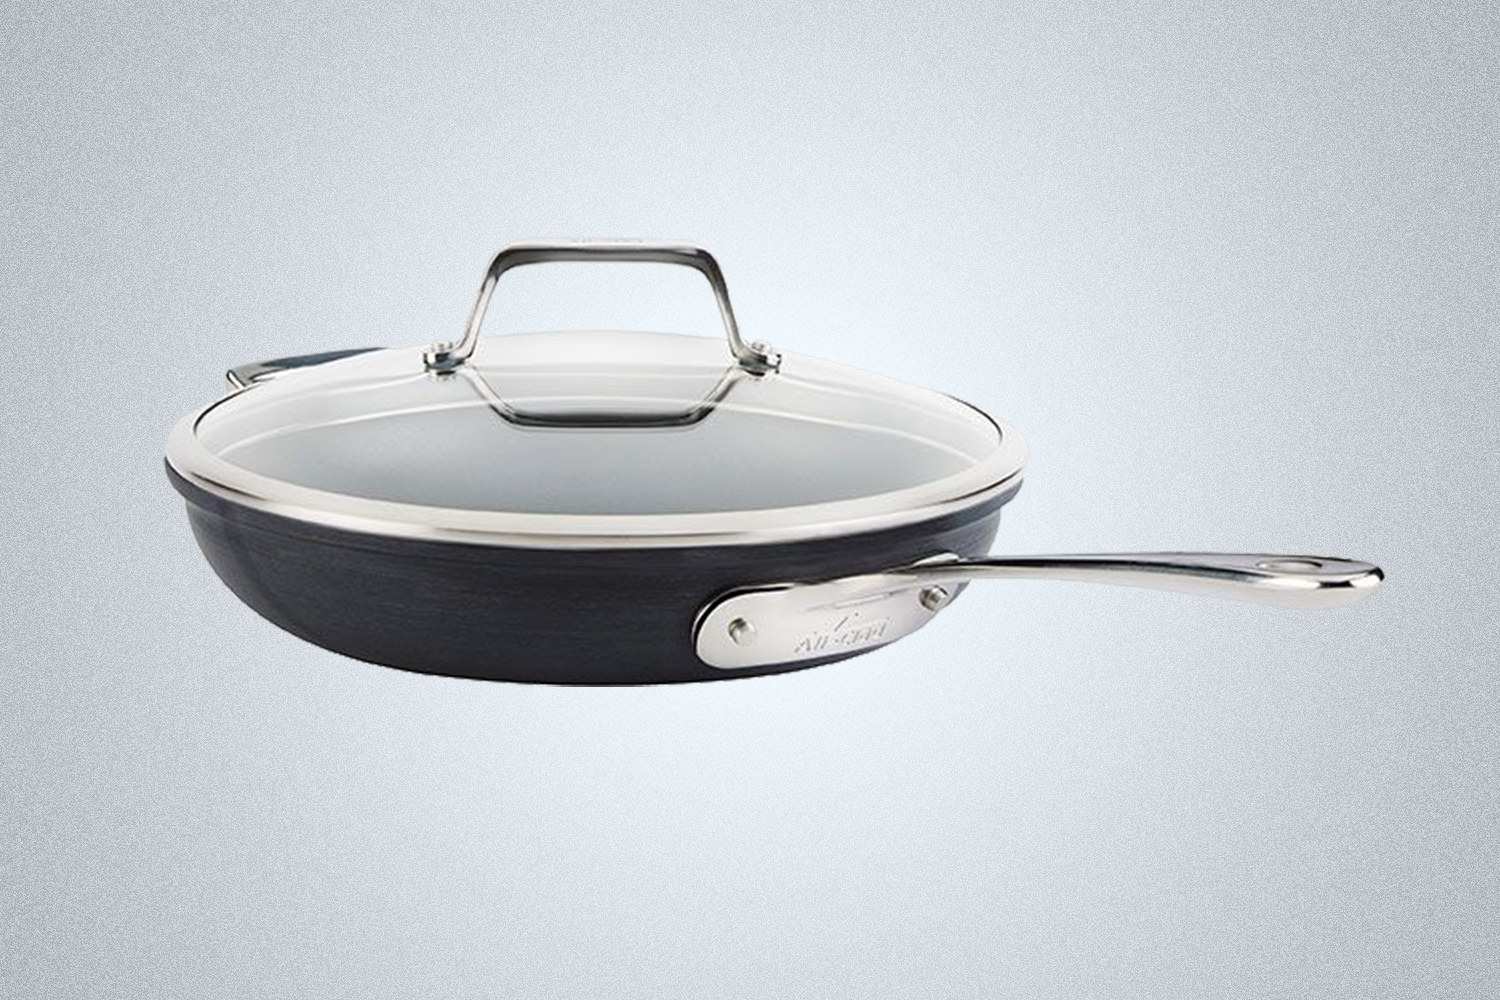 12-Inch Hard Anodized Fry Pan